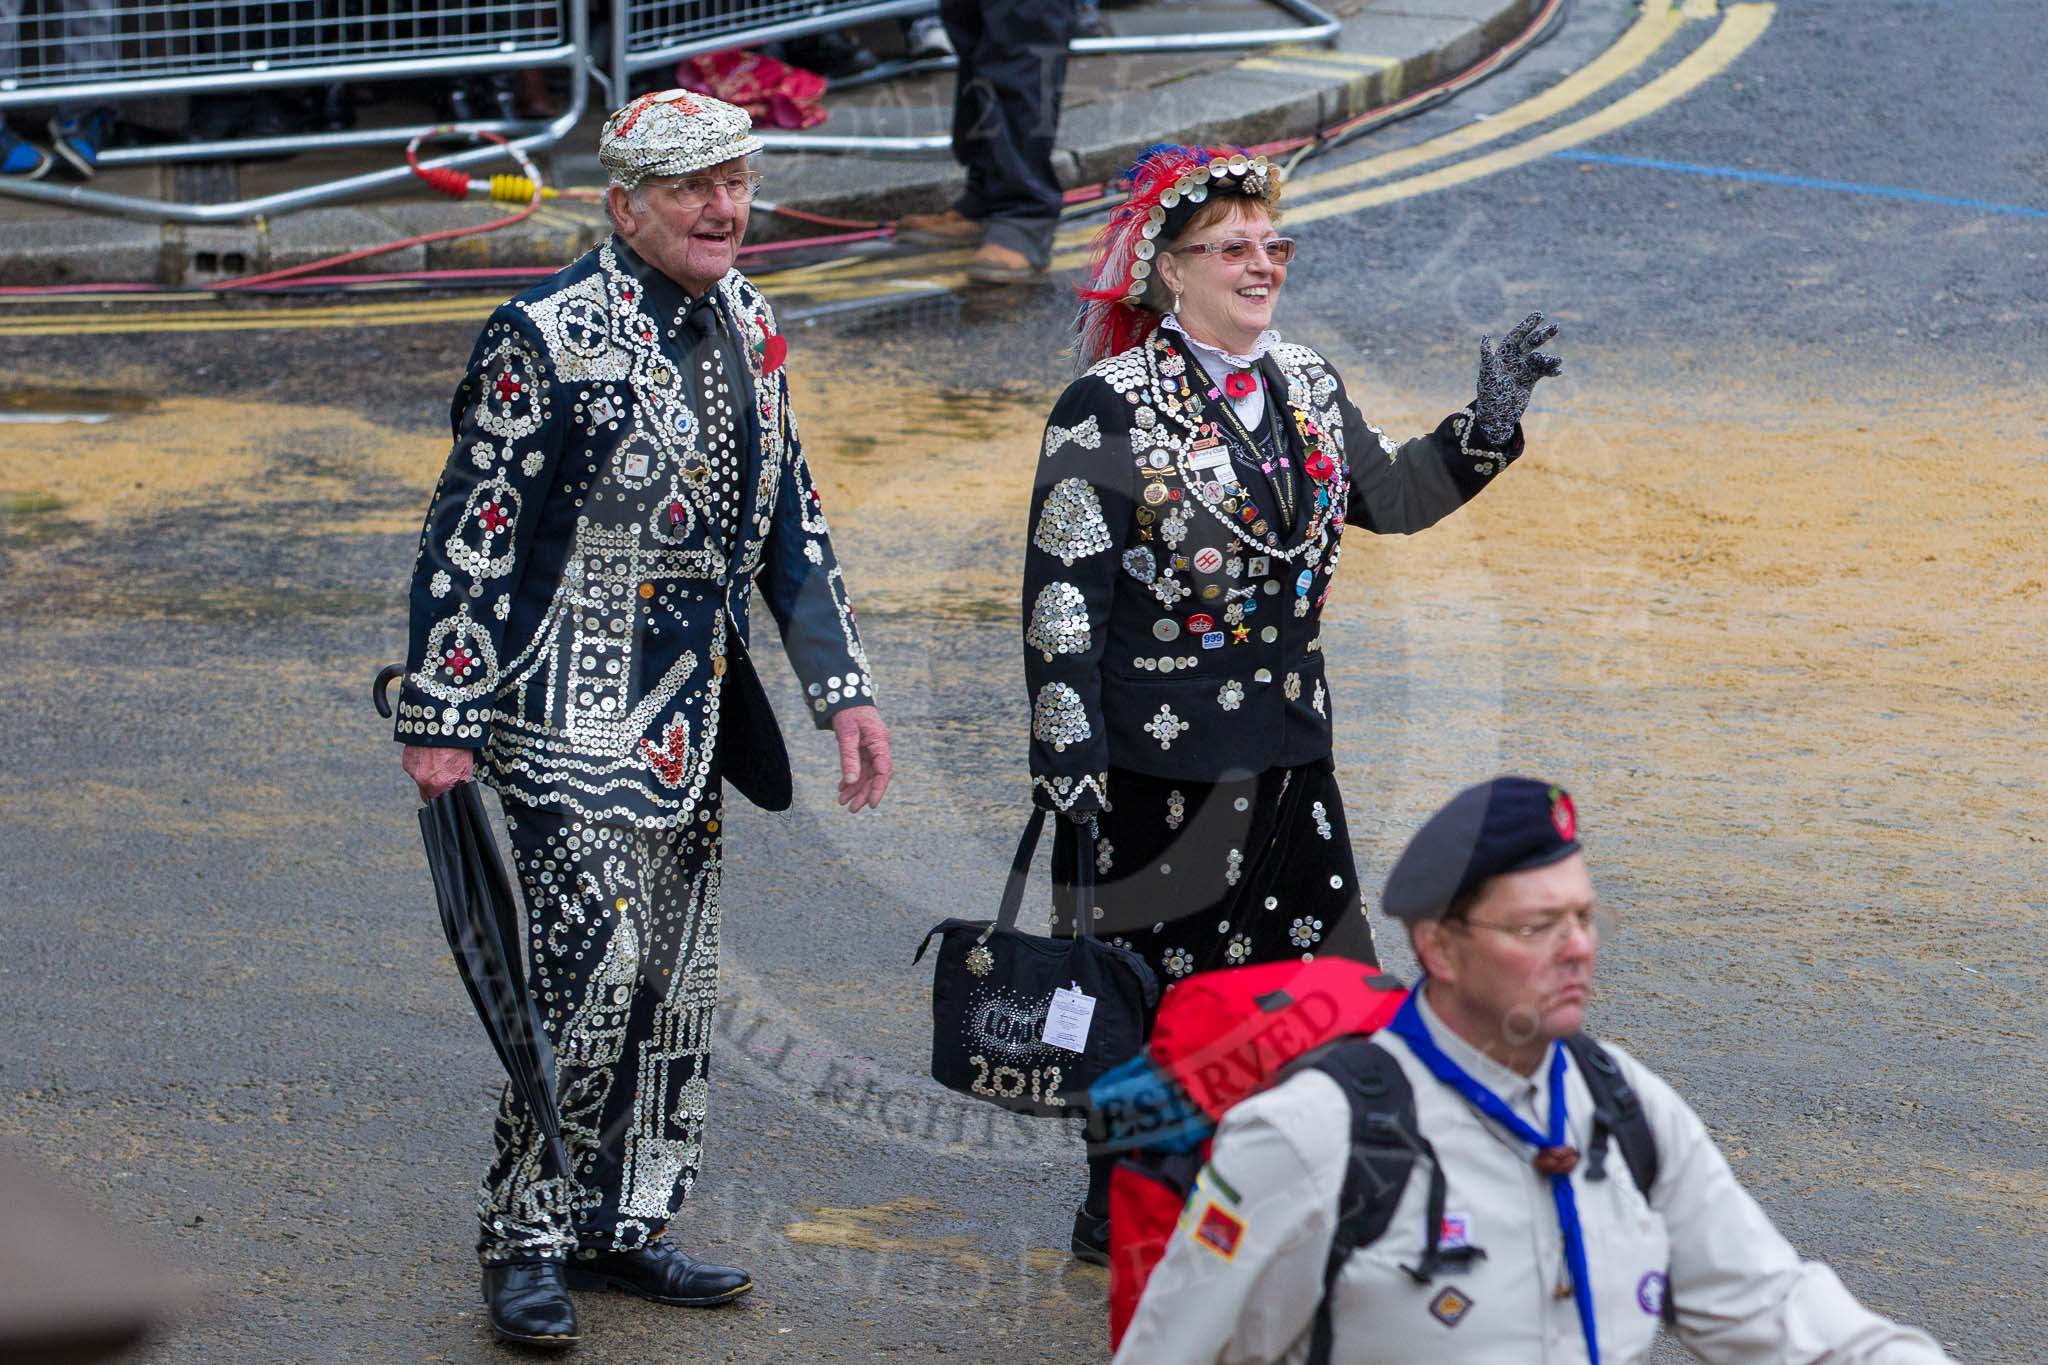 Lord Mayor's Show 2012: Entry 105 - Corps of Drums Society, here with a  London Pearly Queen and King..
Press stand opposite Mansion House, City of London,
London,
Greater London,
United Kingdom,
on 10 November 2012 at 11:53, image #1483